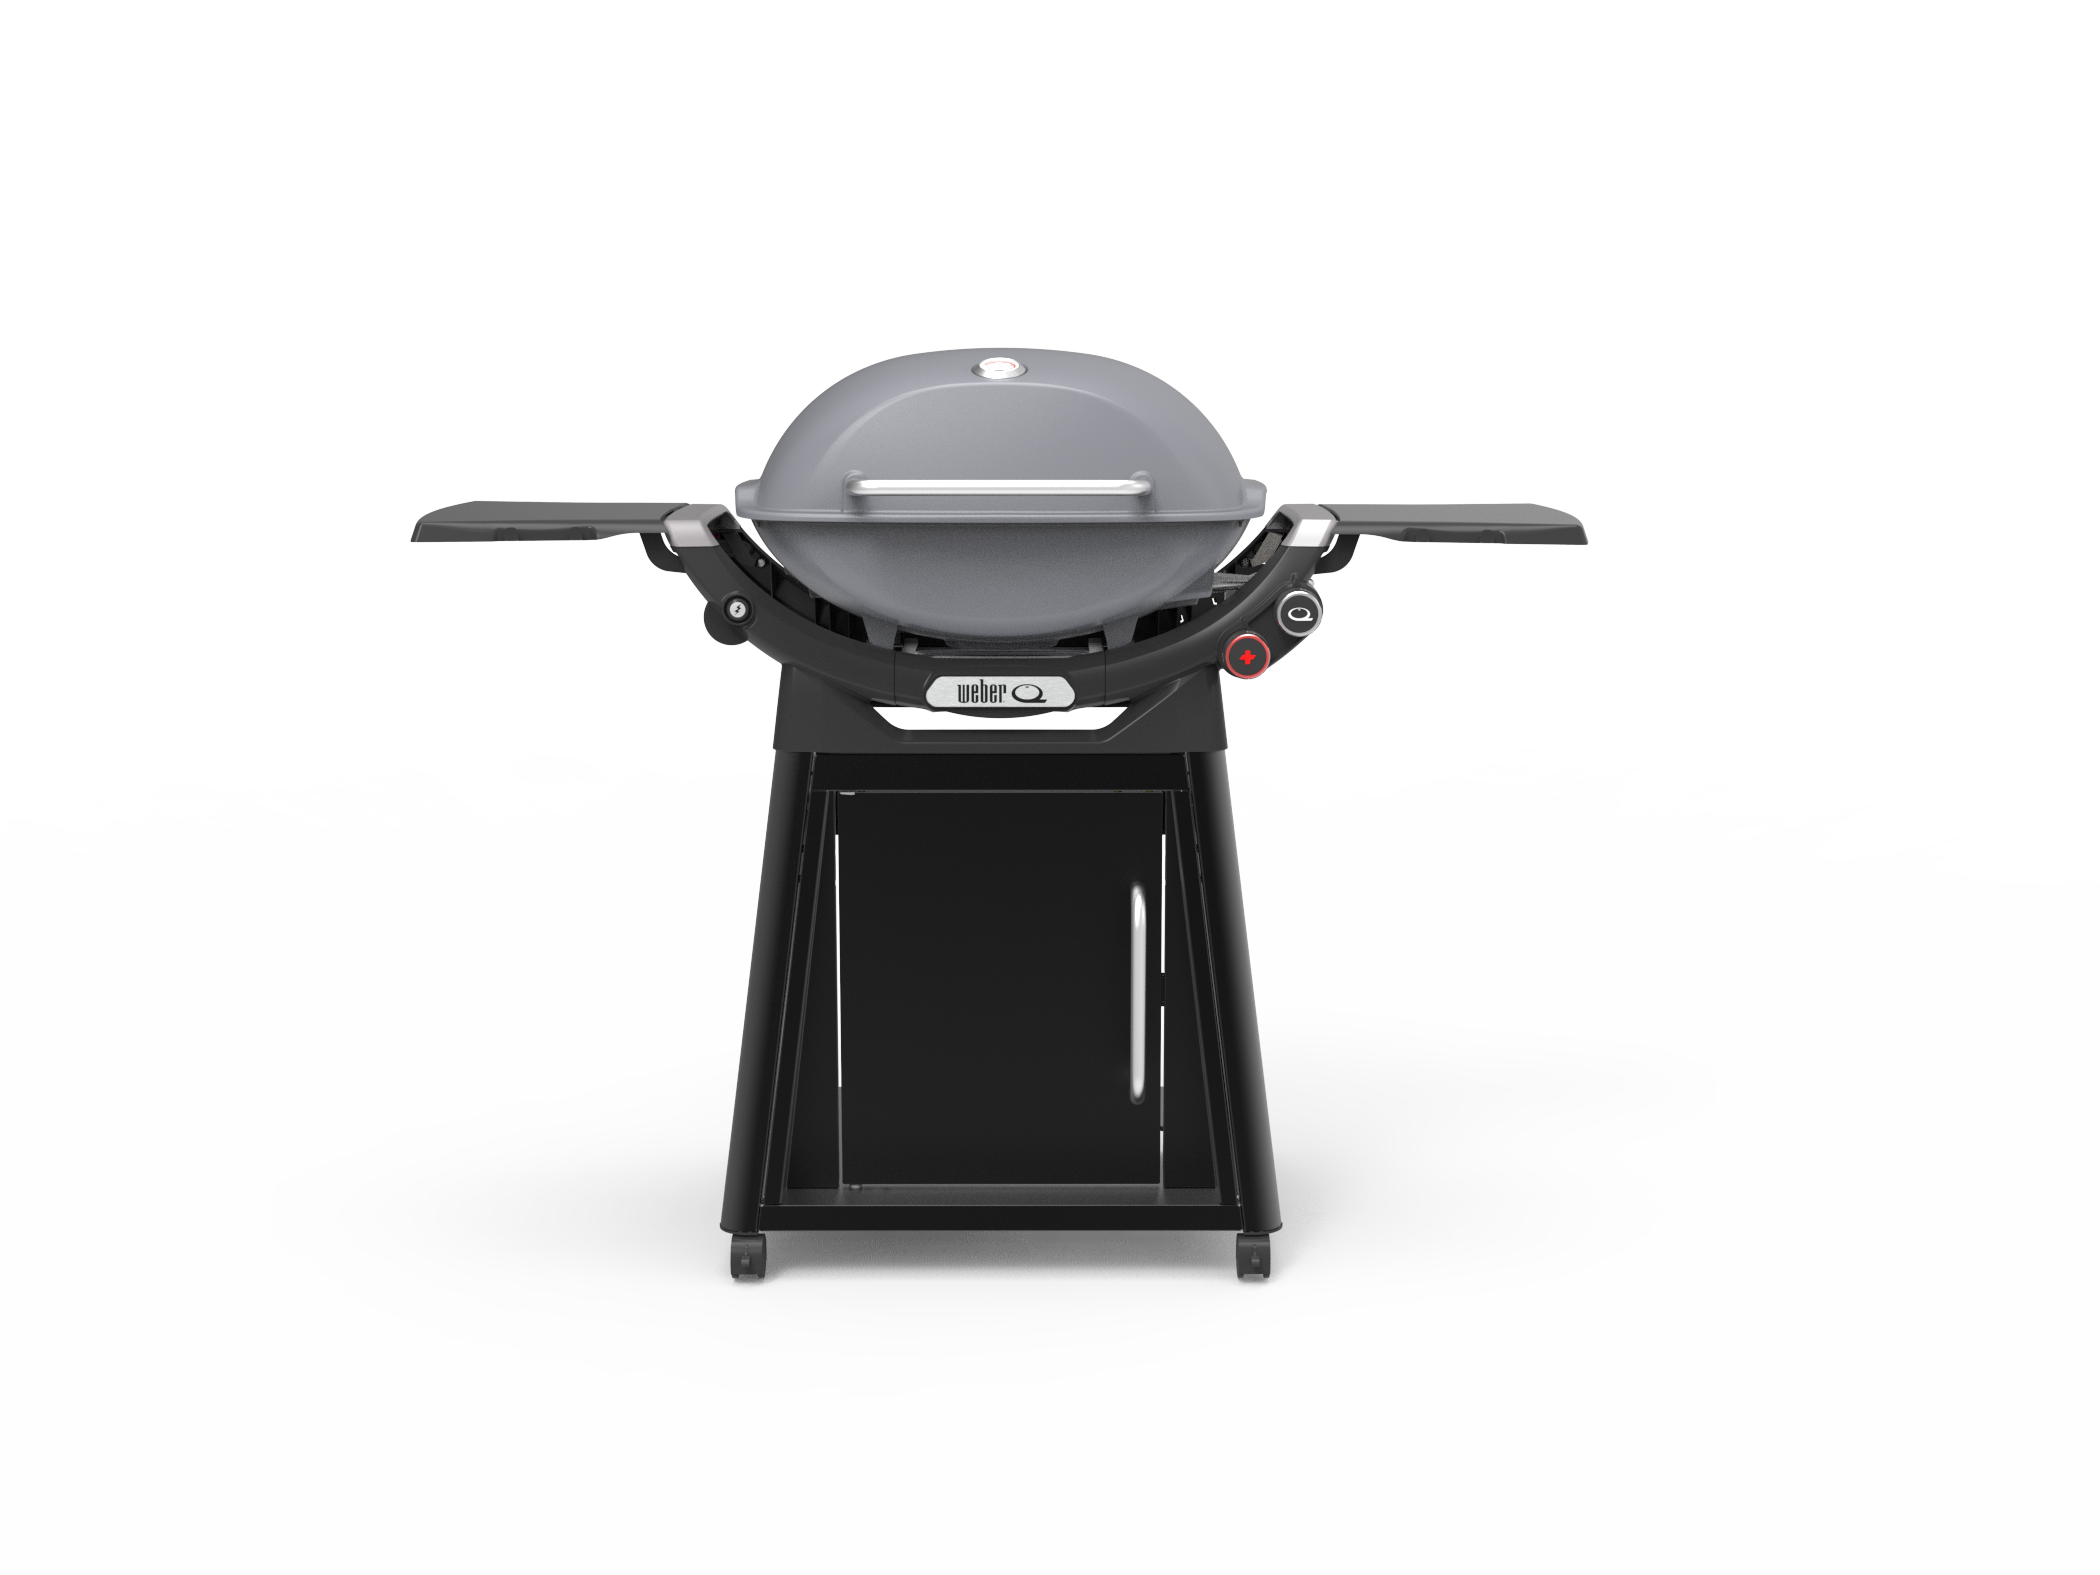 Weber Q 3200 N plus front view in smoke grey